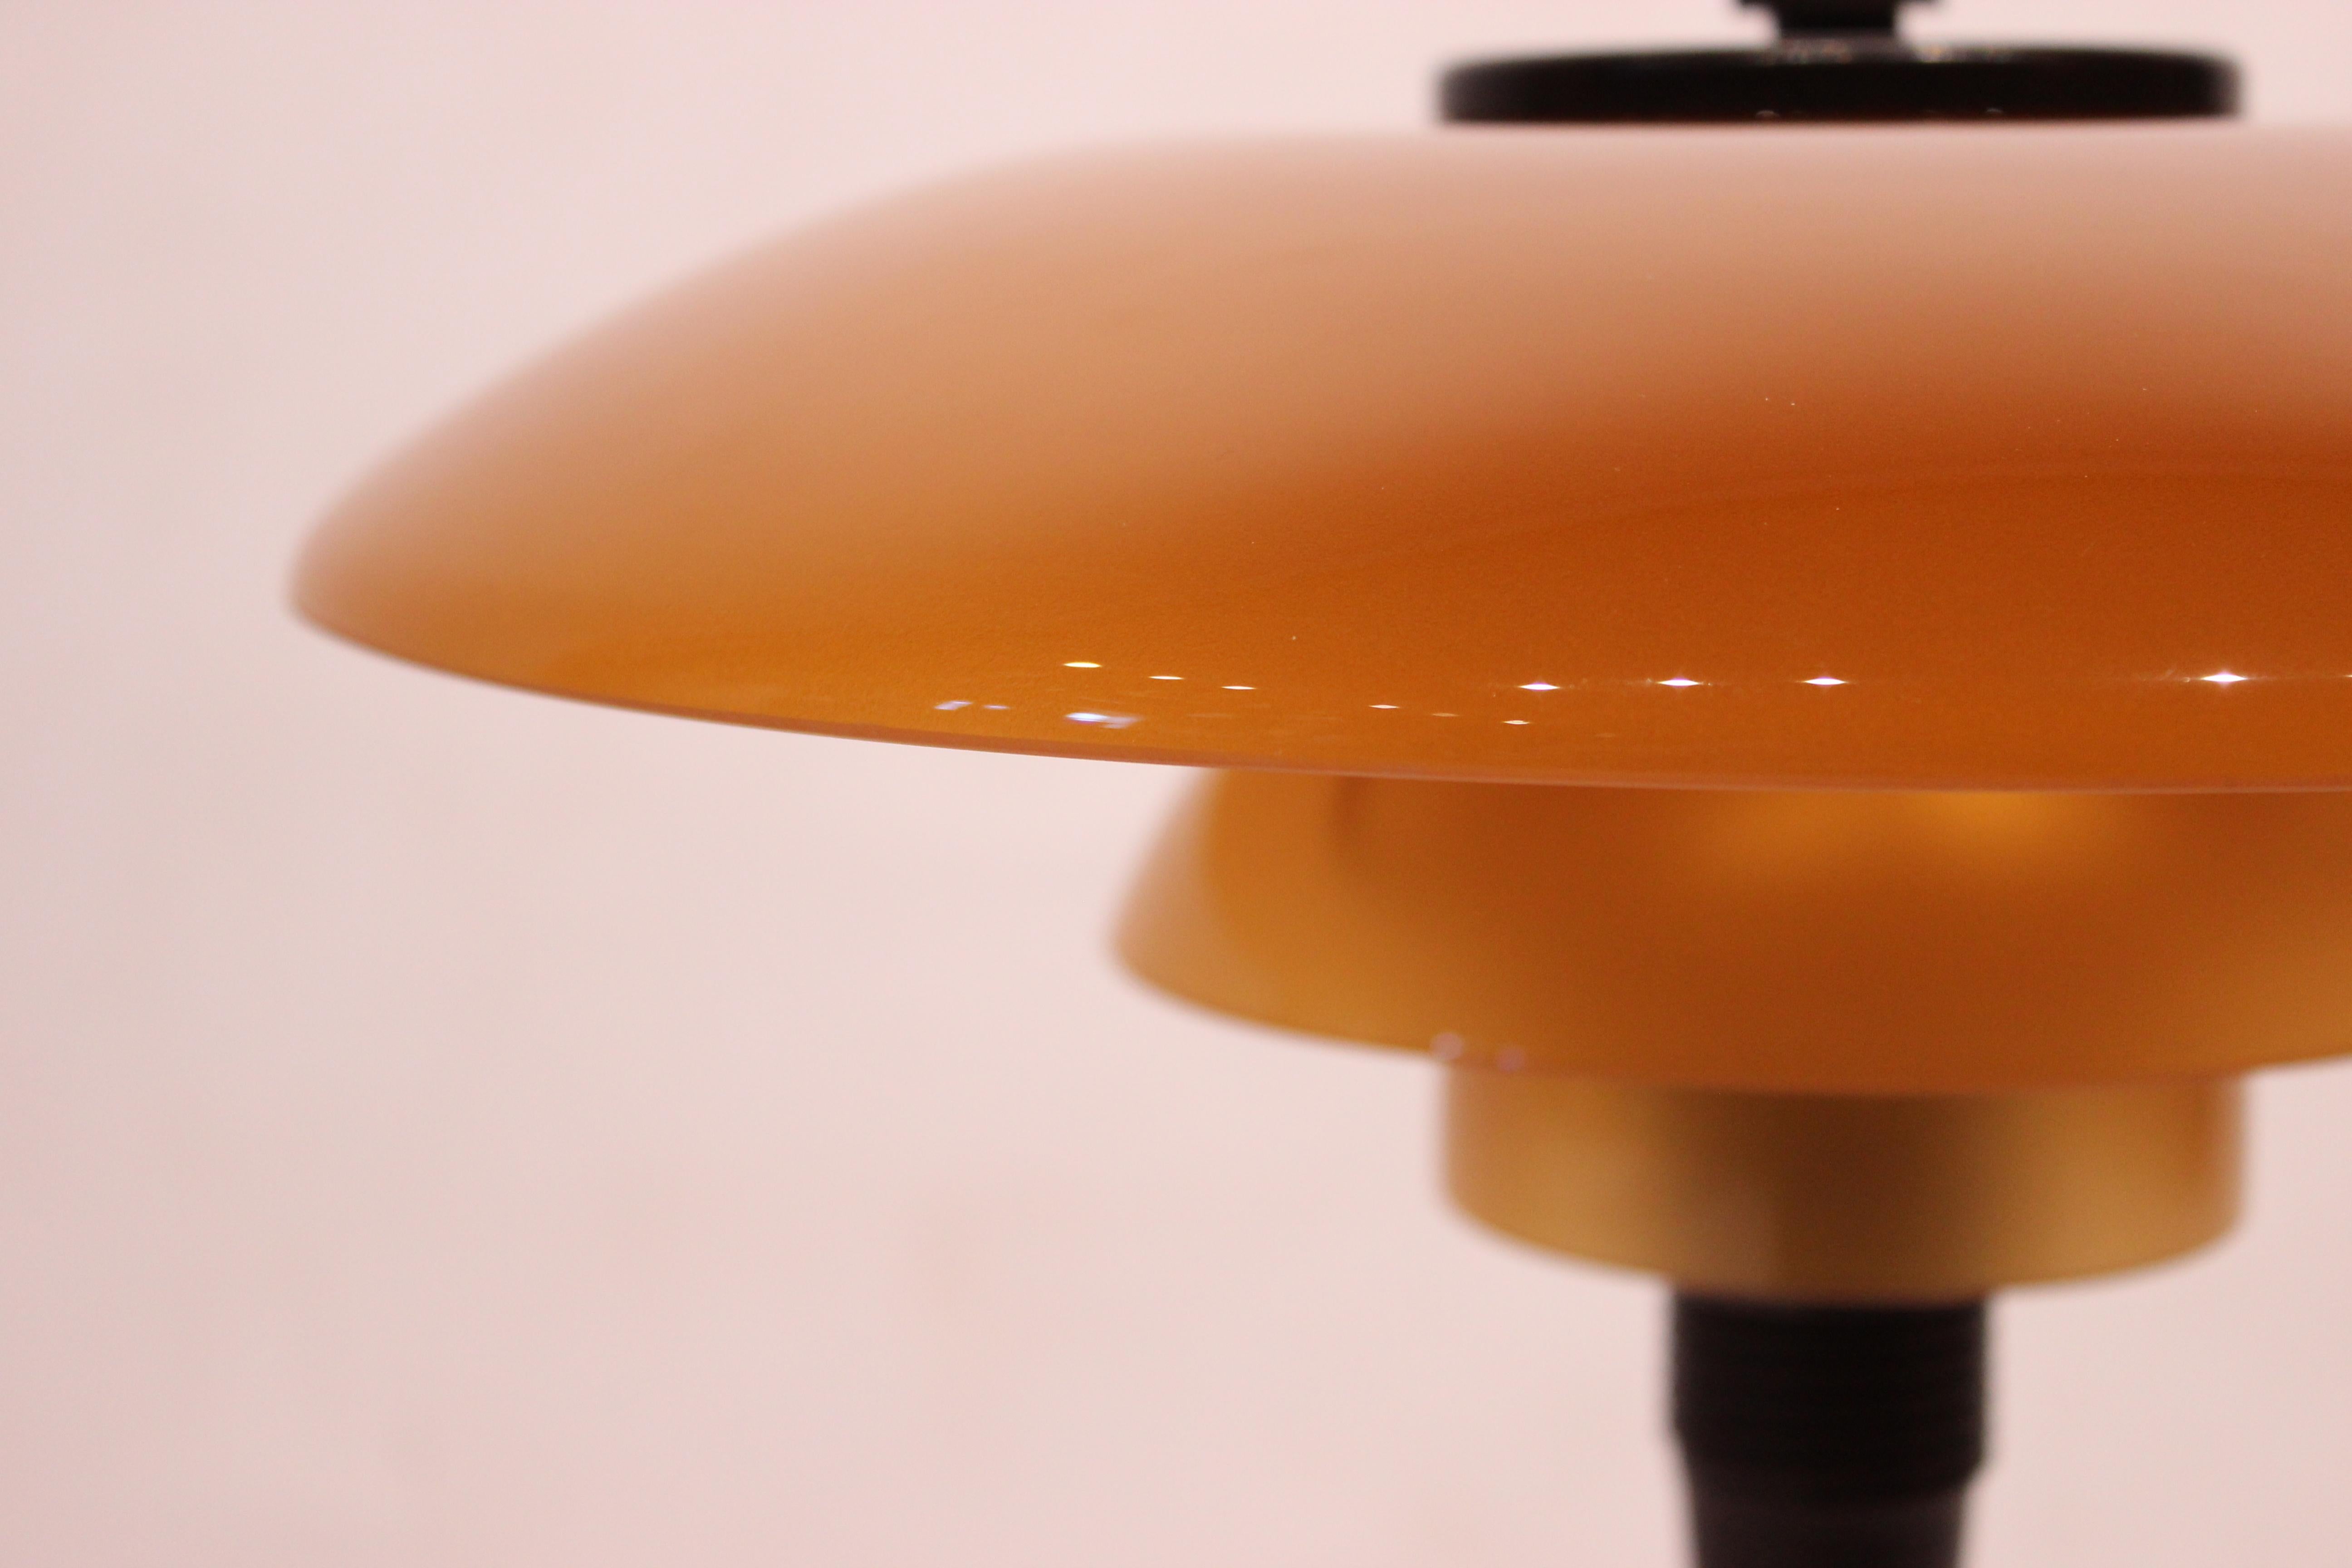 Burnished PH 3/2 Tablelamp with Amber Colored Shades, by Poul Henningsen, 1930s